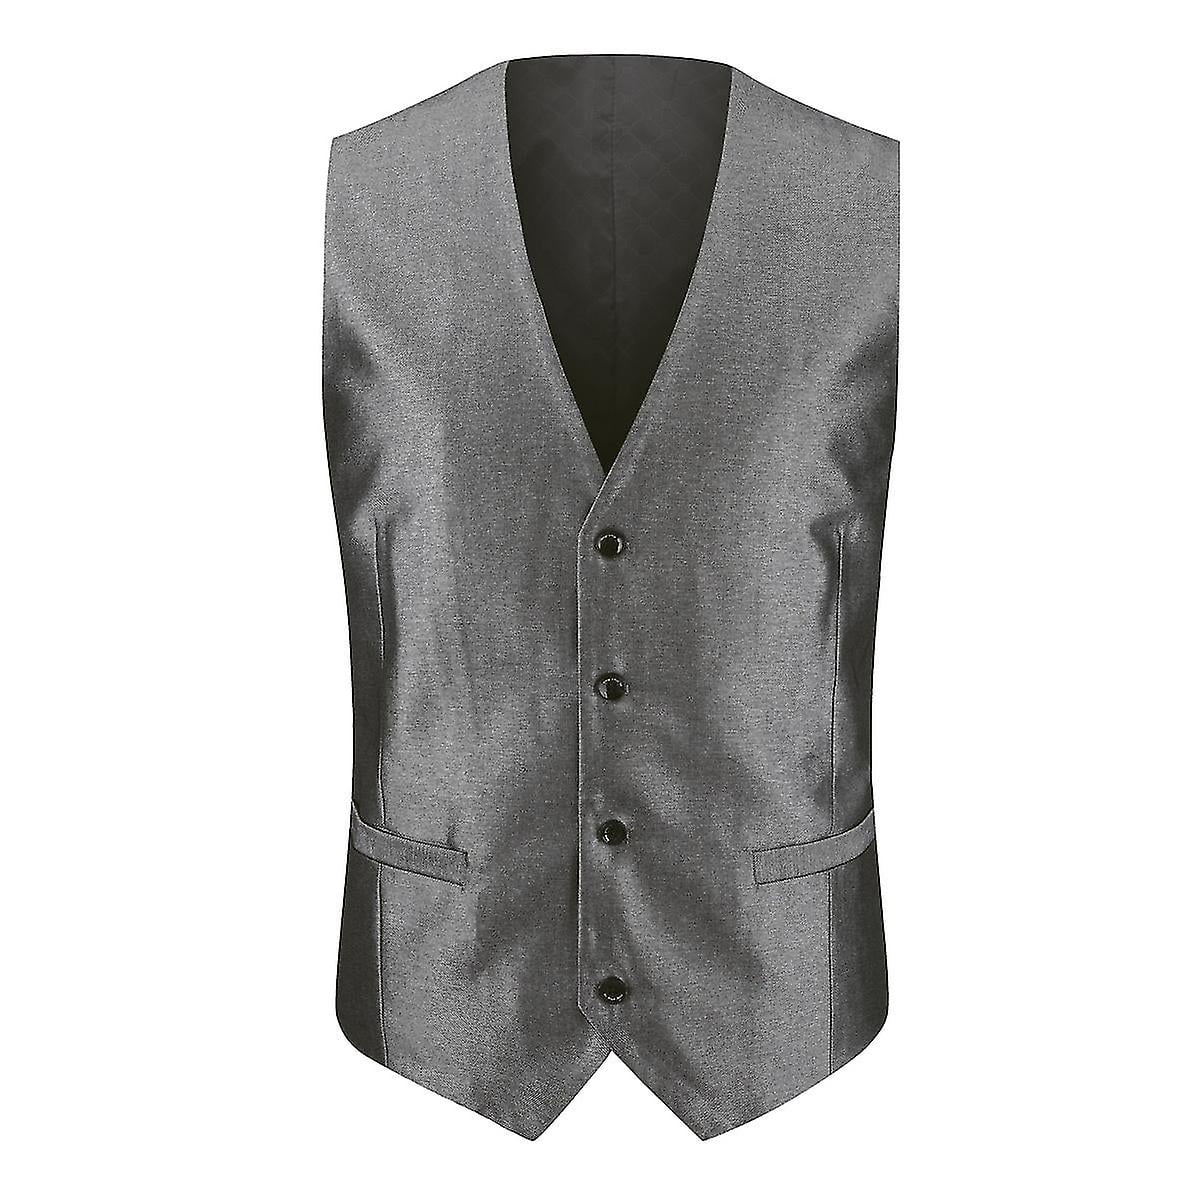 Slim fit Waistcoat jacket for men with 4 button closure